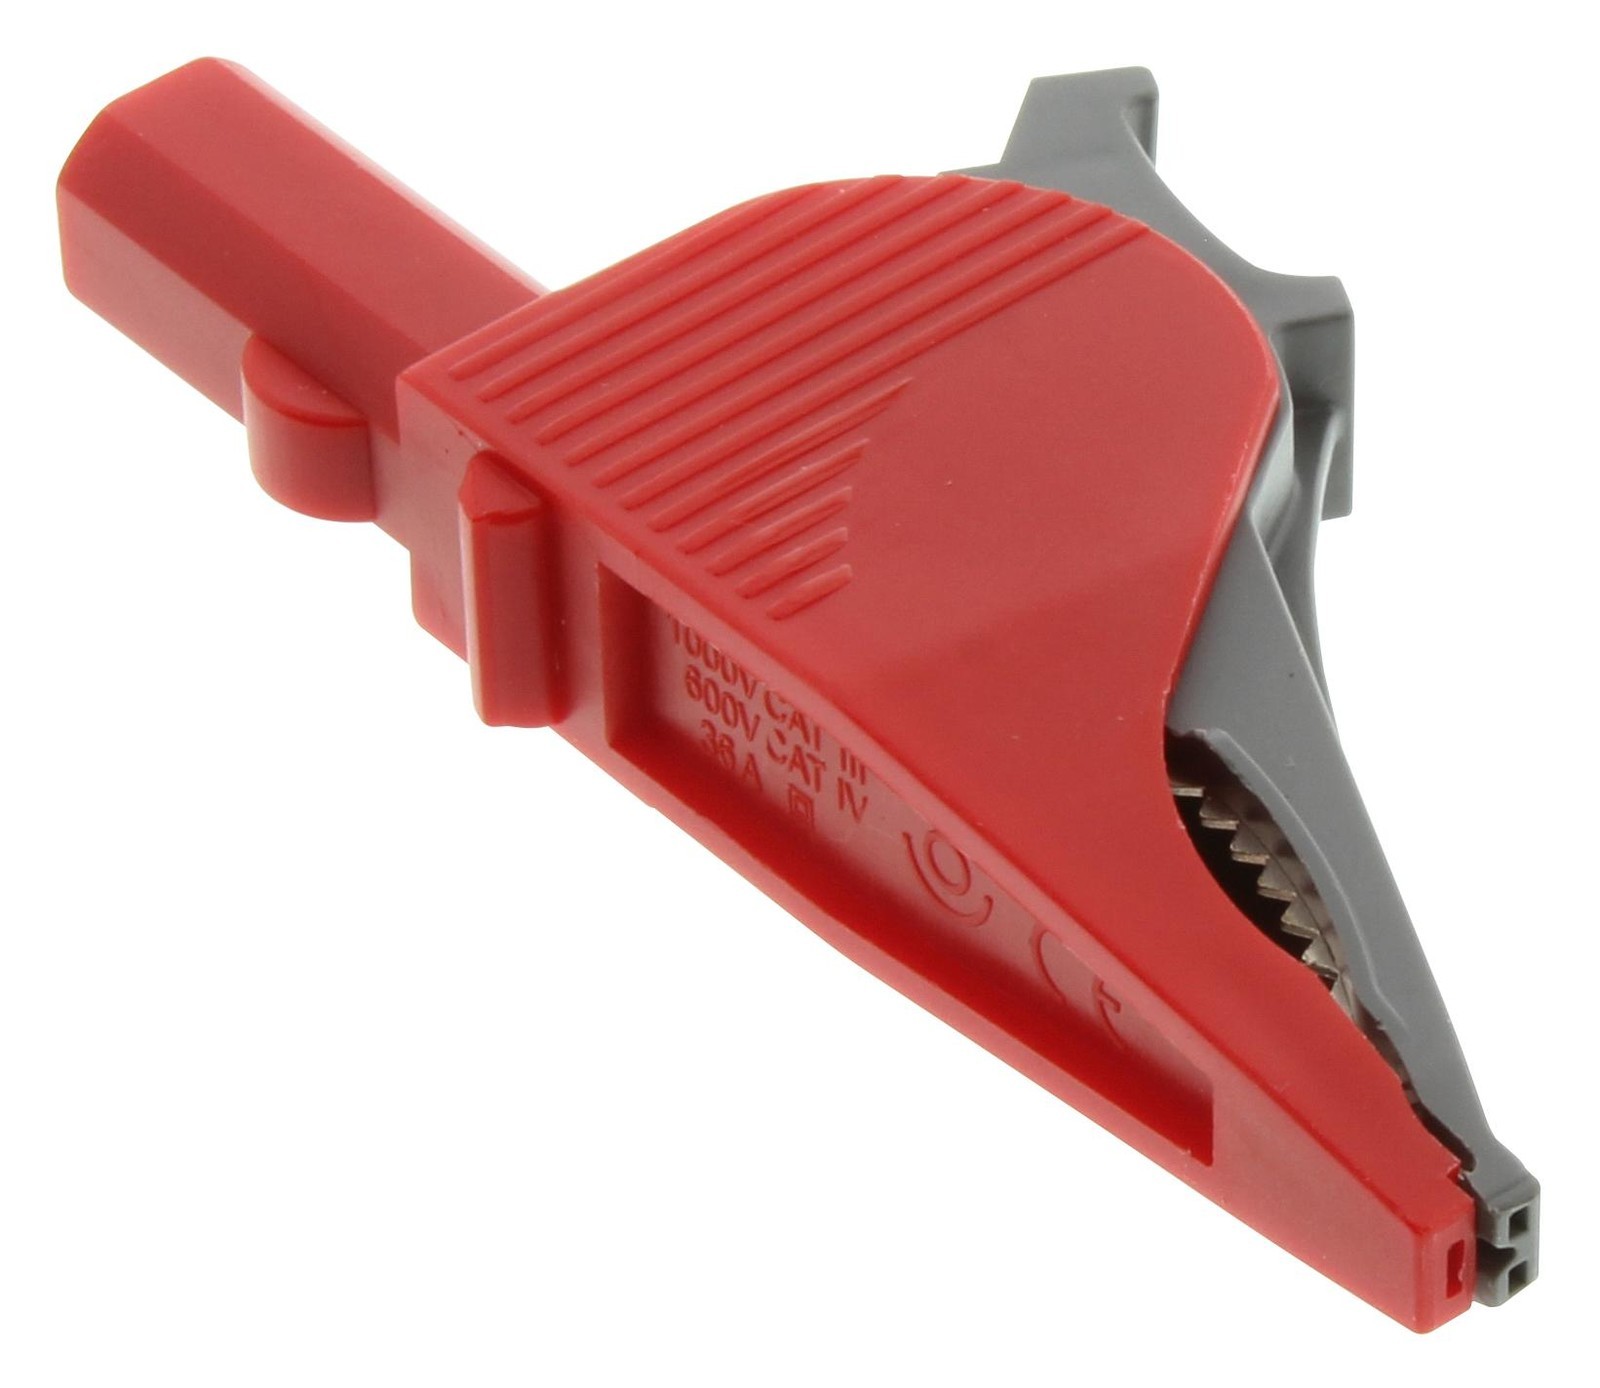 Cal Test Electronics Ct3251-2 Insulated Alligator Clip, Ex-Large (Elephant Clip), Red